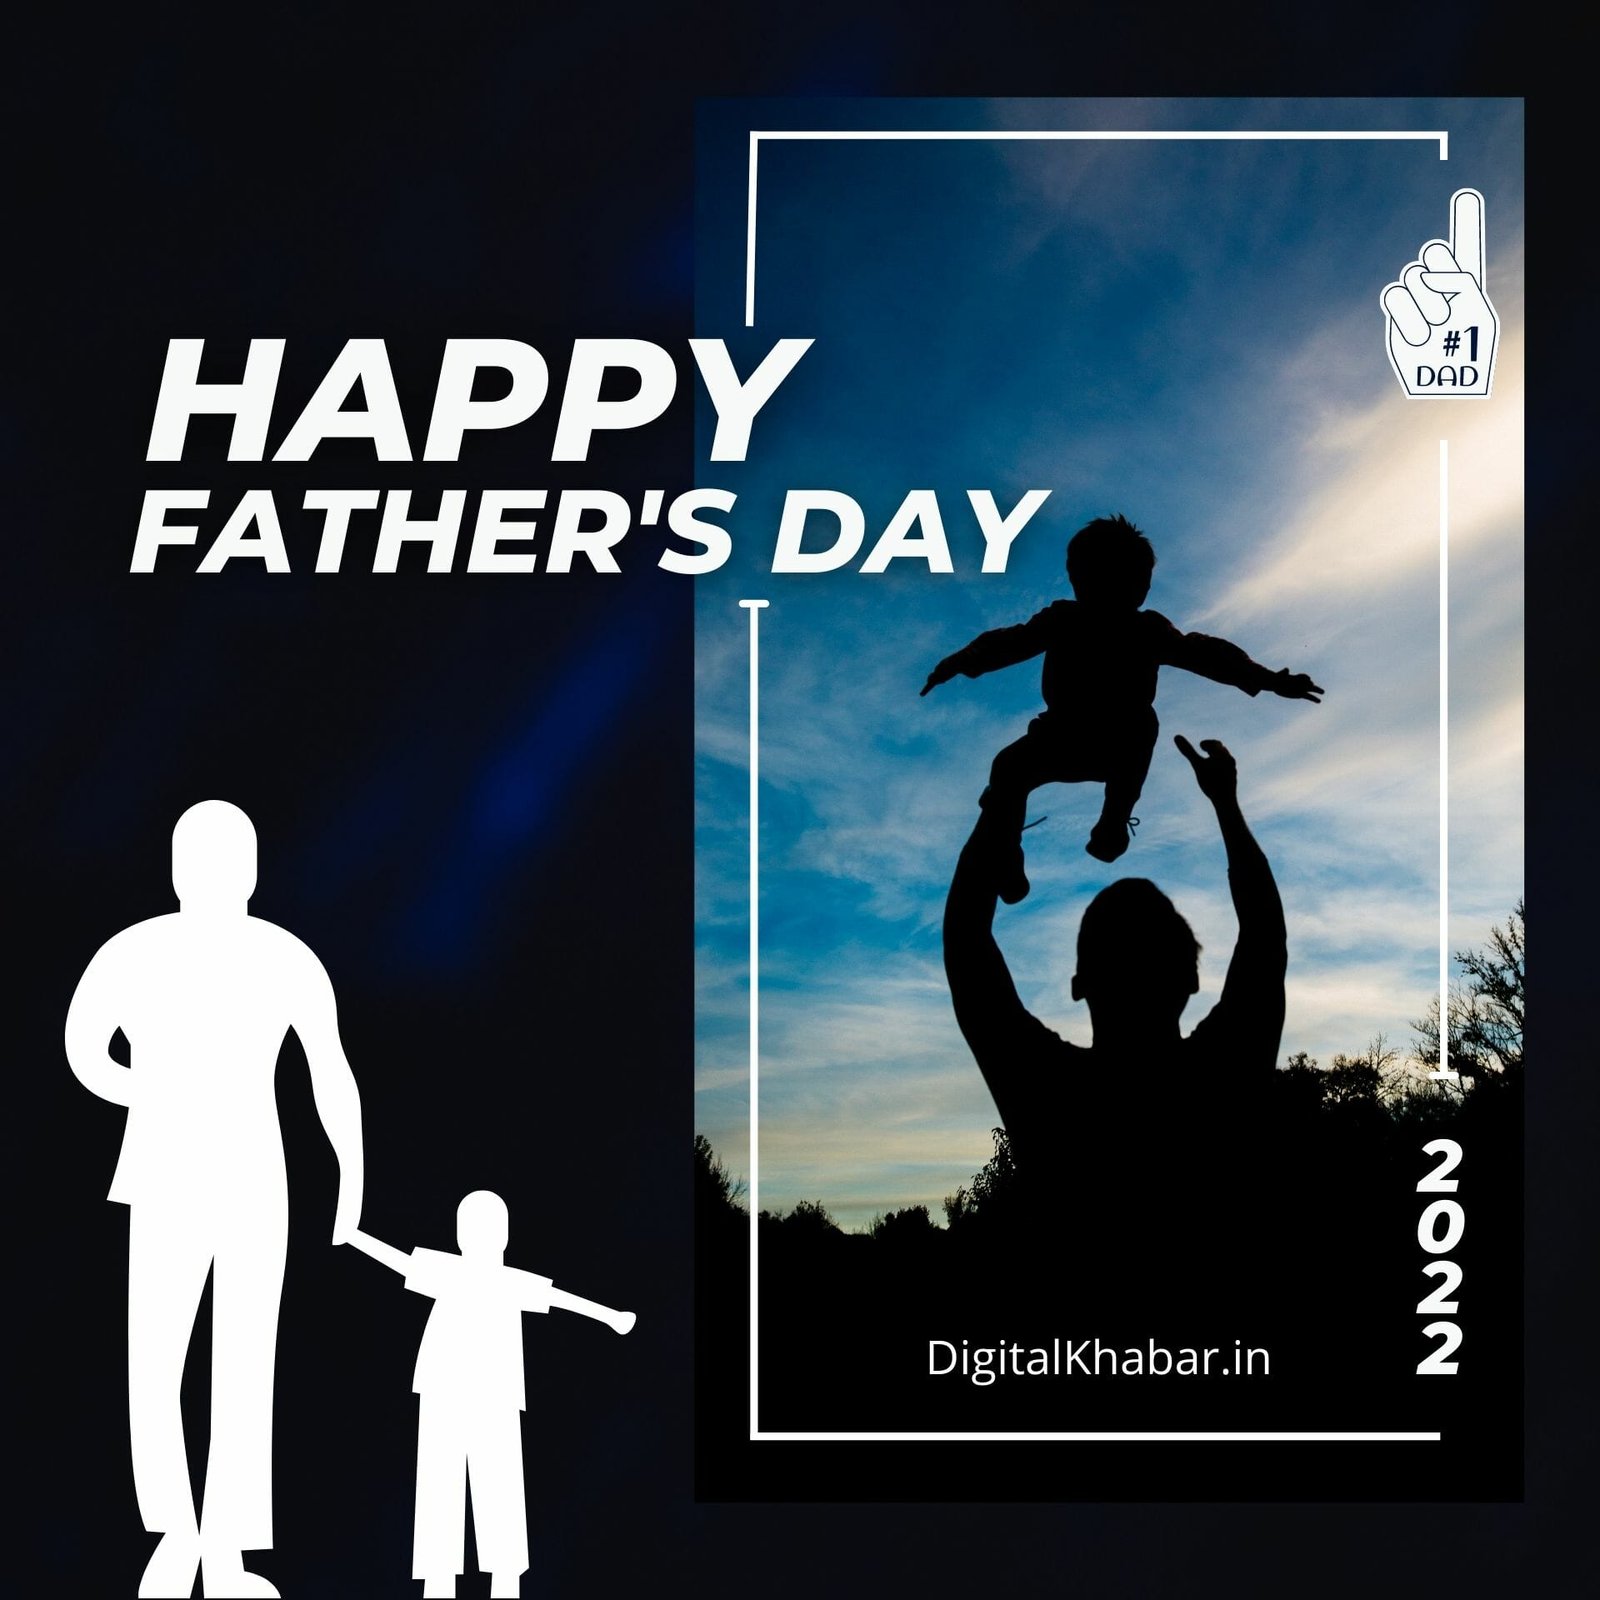 Father’s Day wishes with images